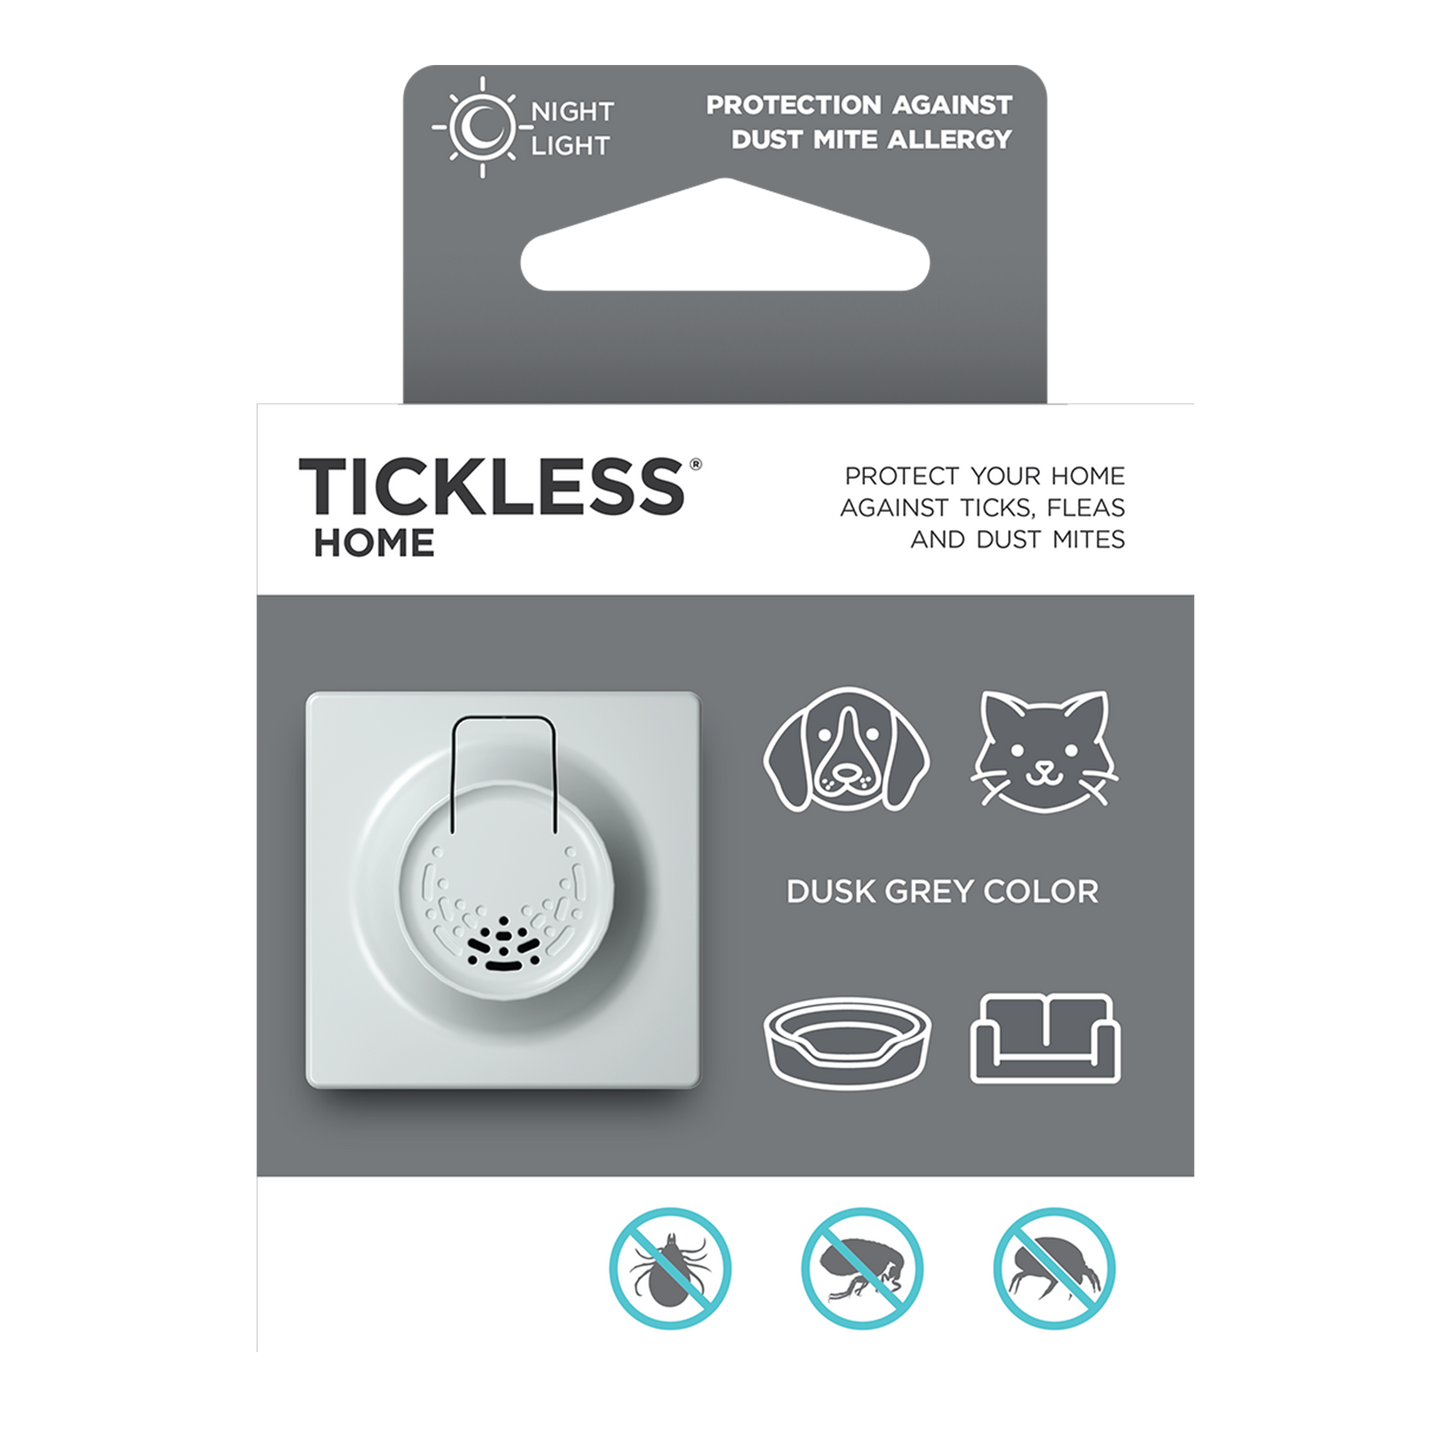 TicklessUSA Tickless Home Protection Chemical-Free Tick and Flea Repellent for Homes sonicguard SonicGuard sonicguardusa SonicGuardUSA tick repeller ultrasonic Tickless TicklessUSA tick and flea repellent safe